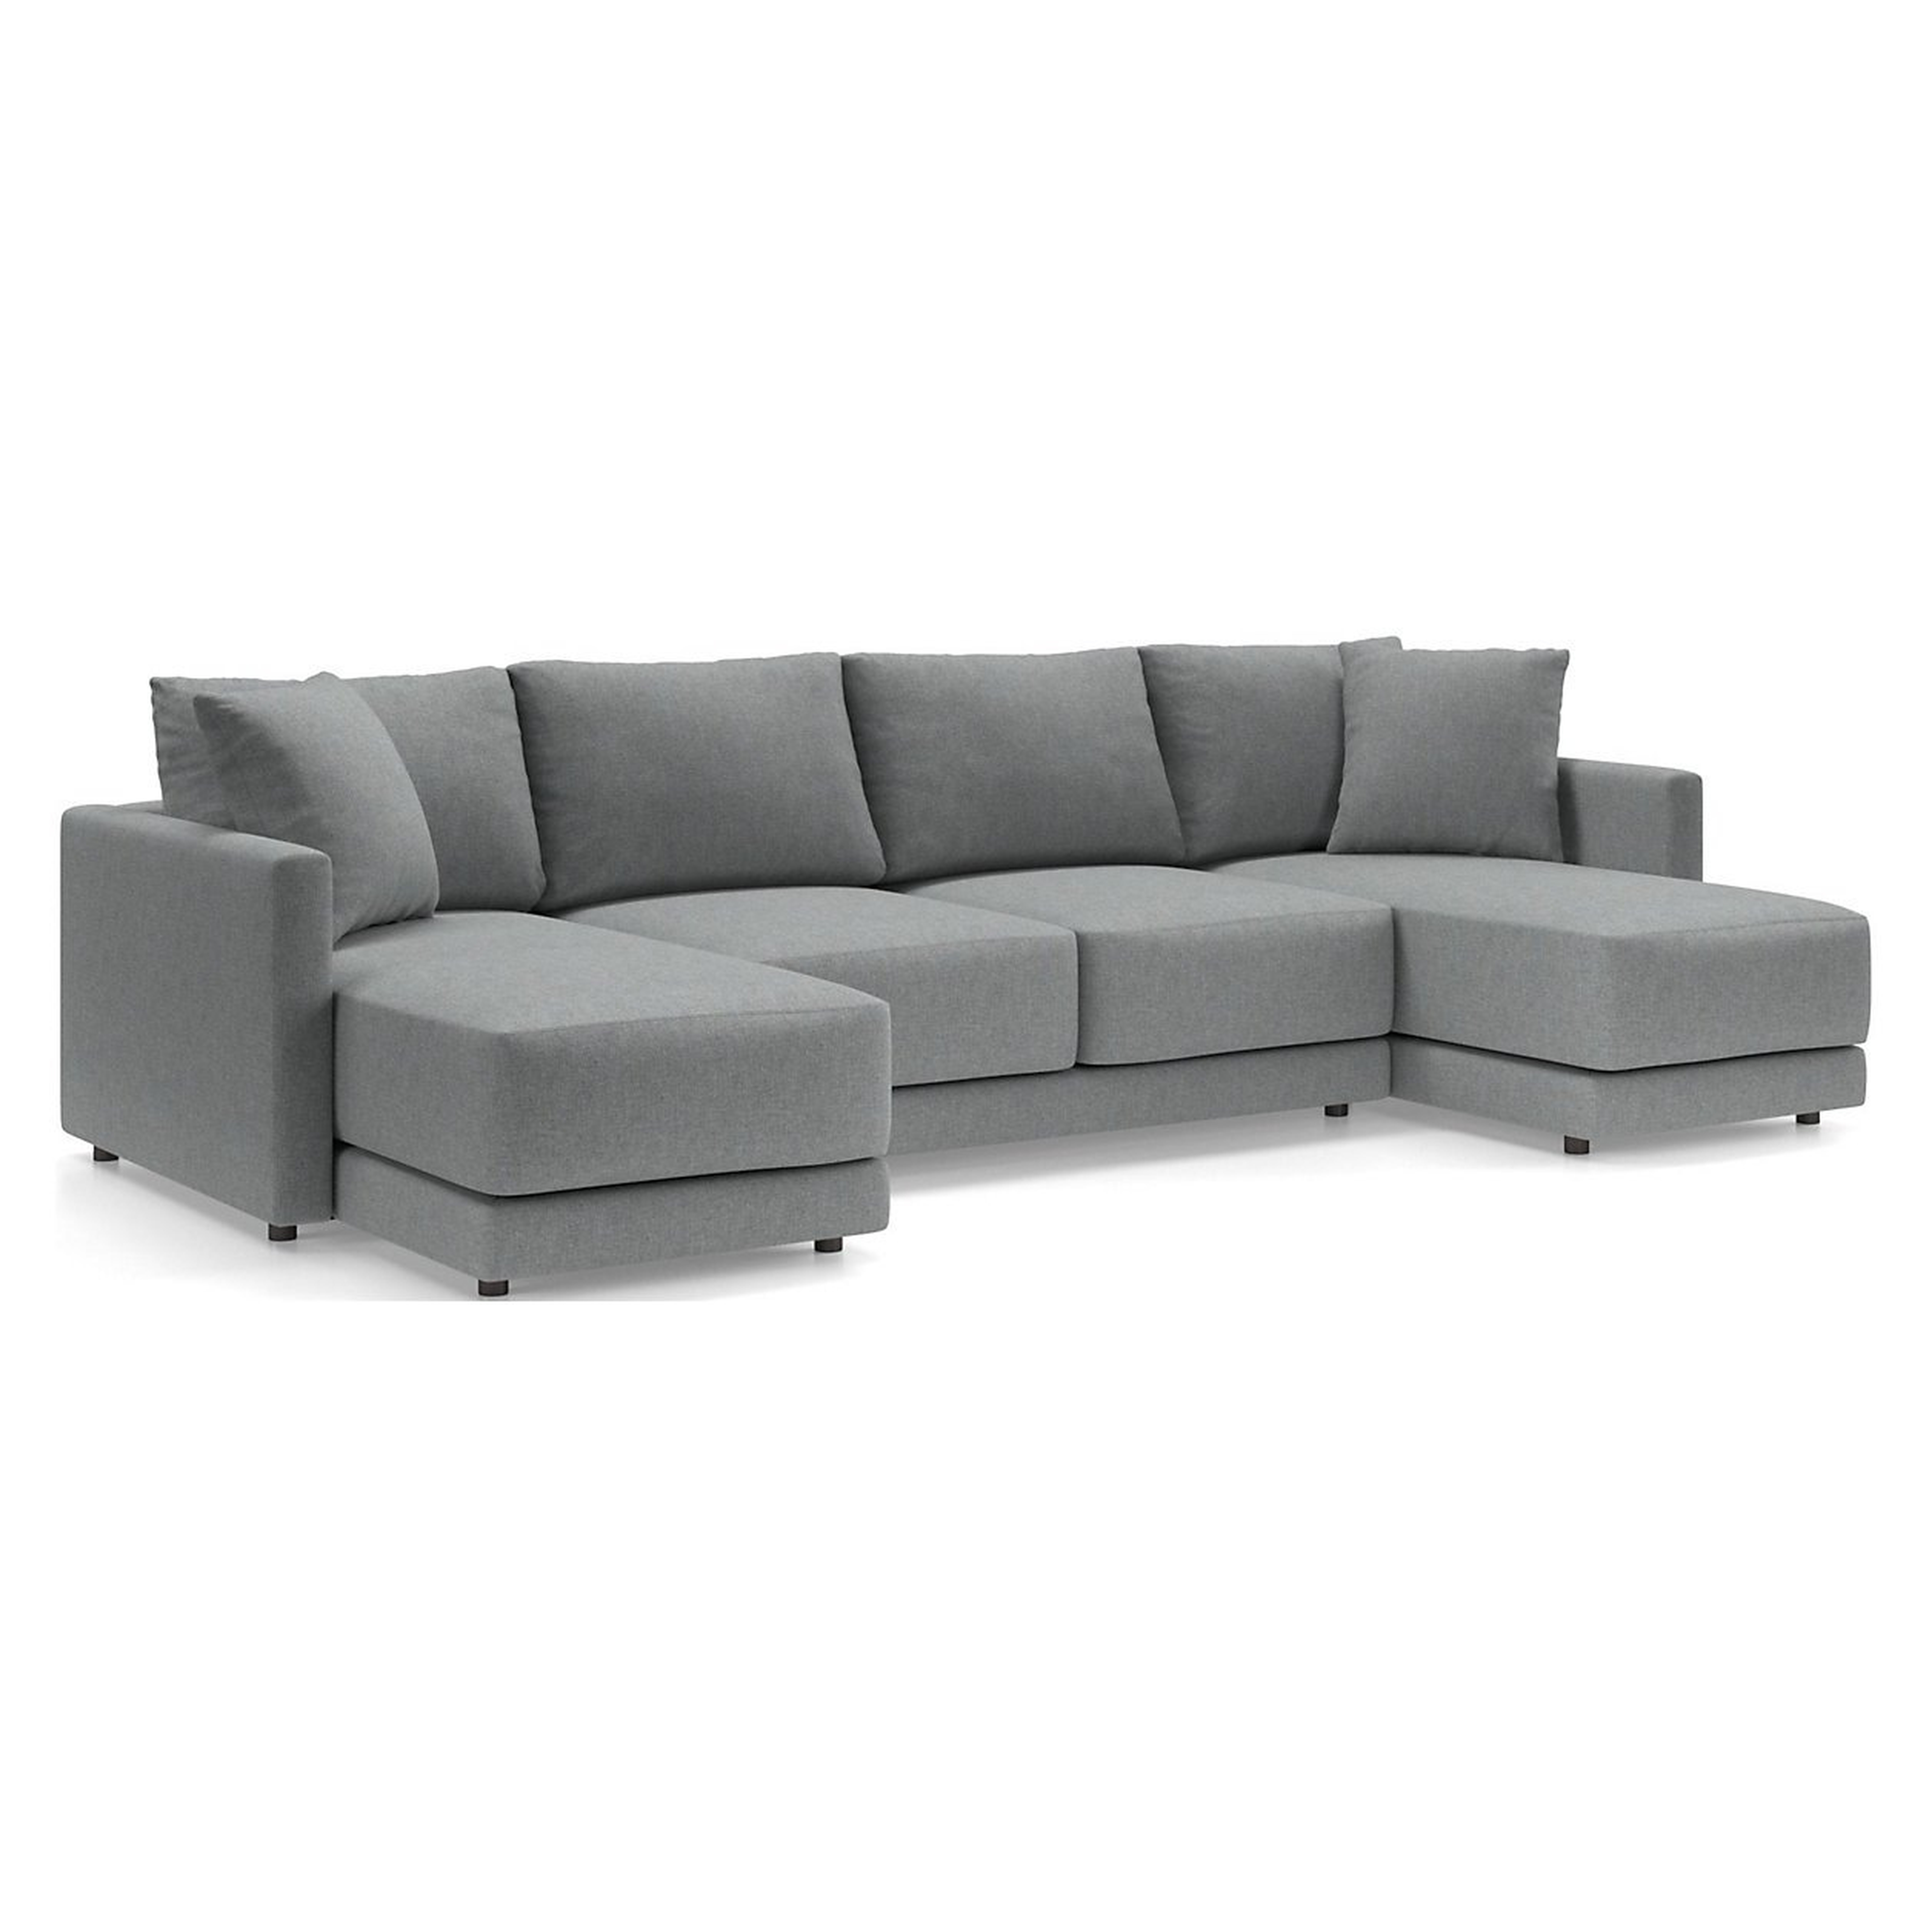 Gather Deep 3-Piece Double Chaise Sectional Sofa - Crate and Barrel